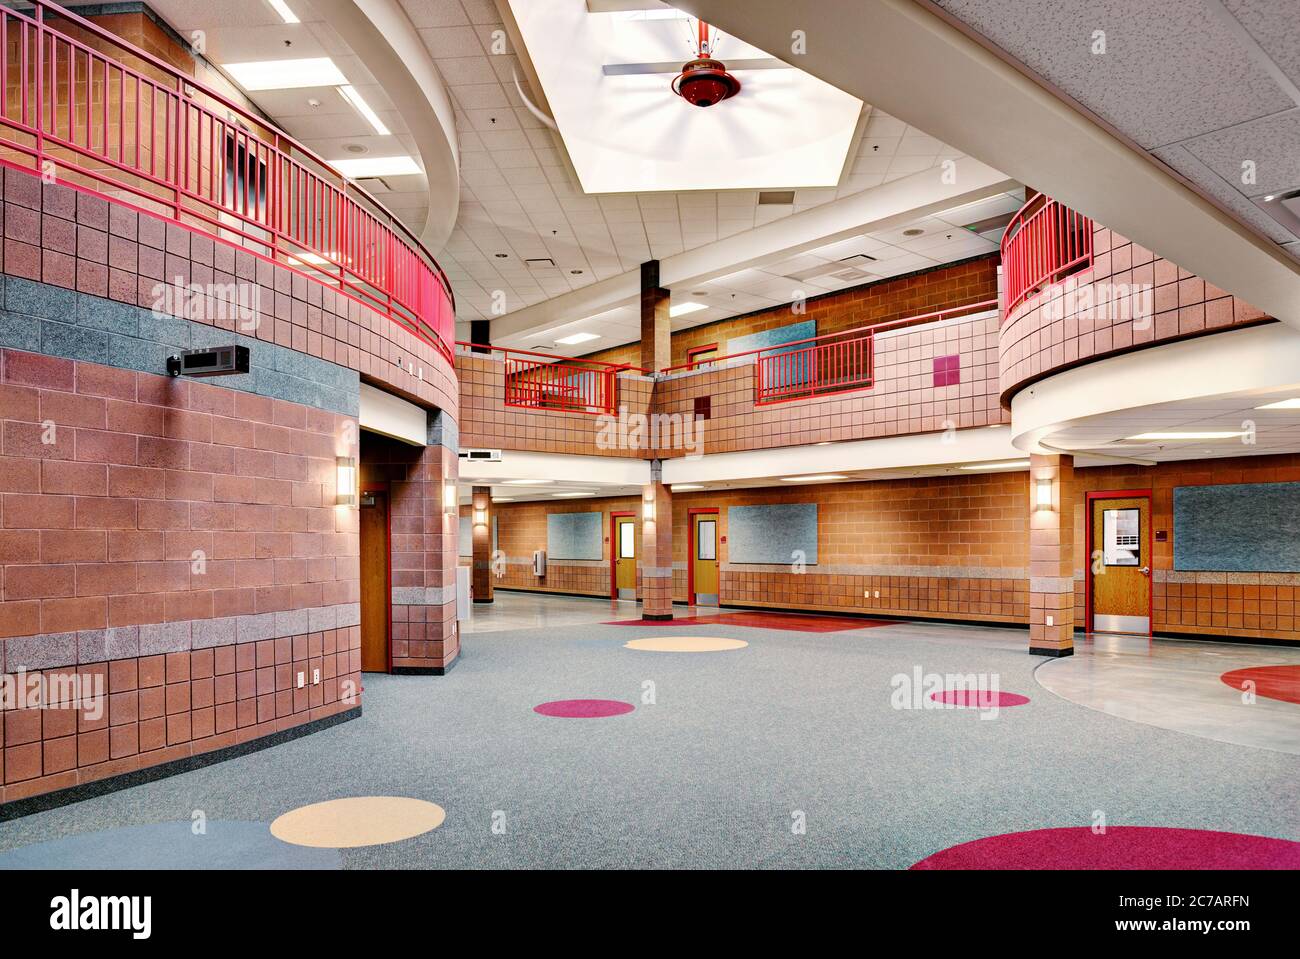 The main hallway in an elementary school, with money saving cnstruction materials, and High efficency computer controlled LED light fixtures. Stock Photo